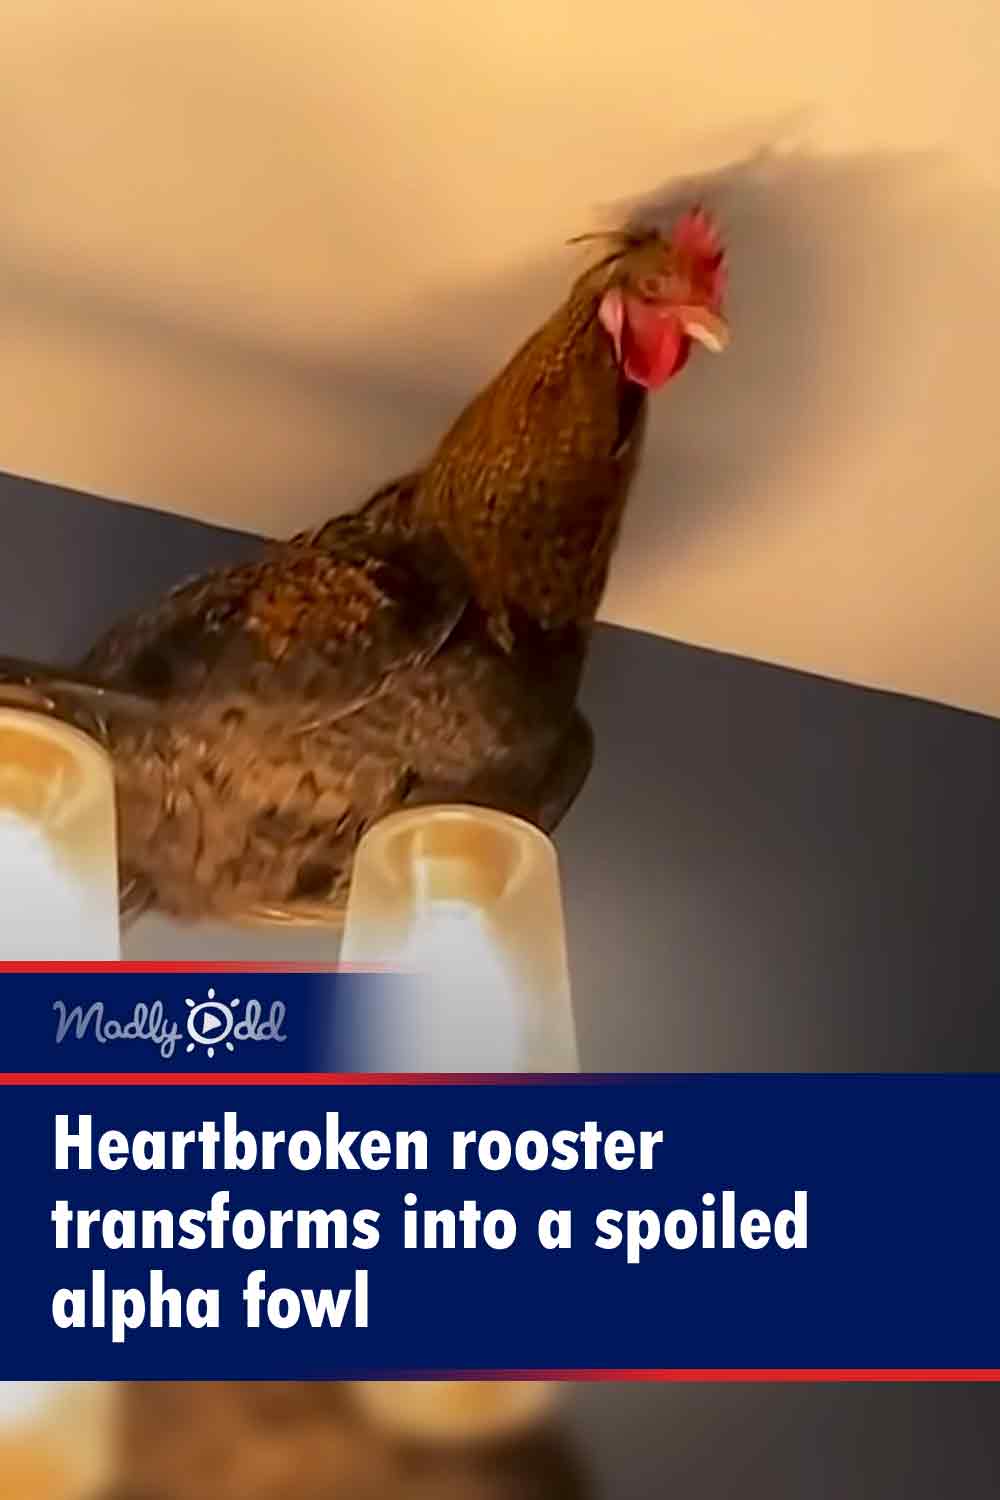 Heartbroken rooster transforms into a spoiled alpha fowl